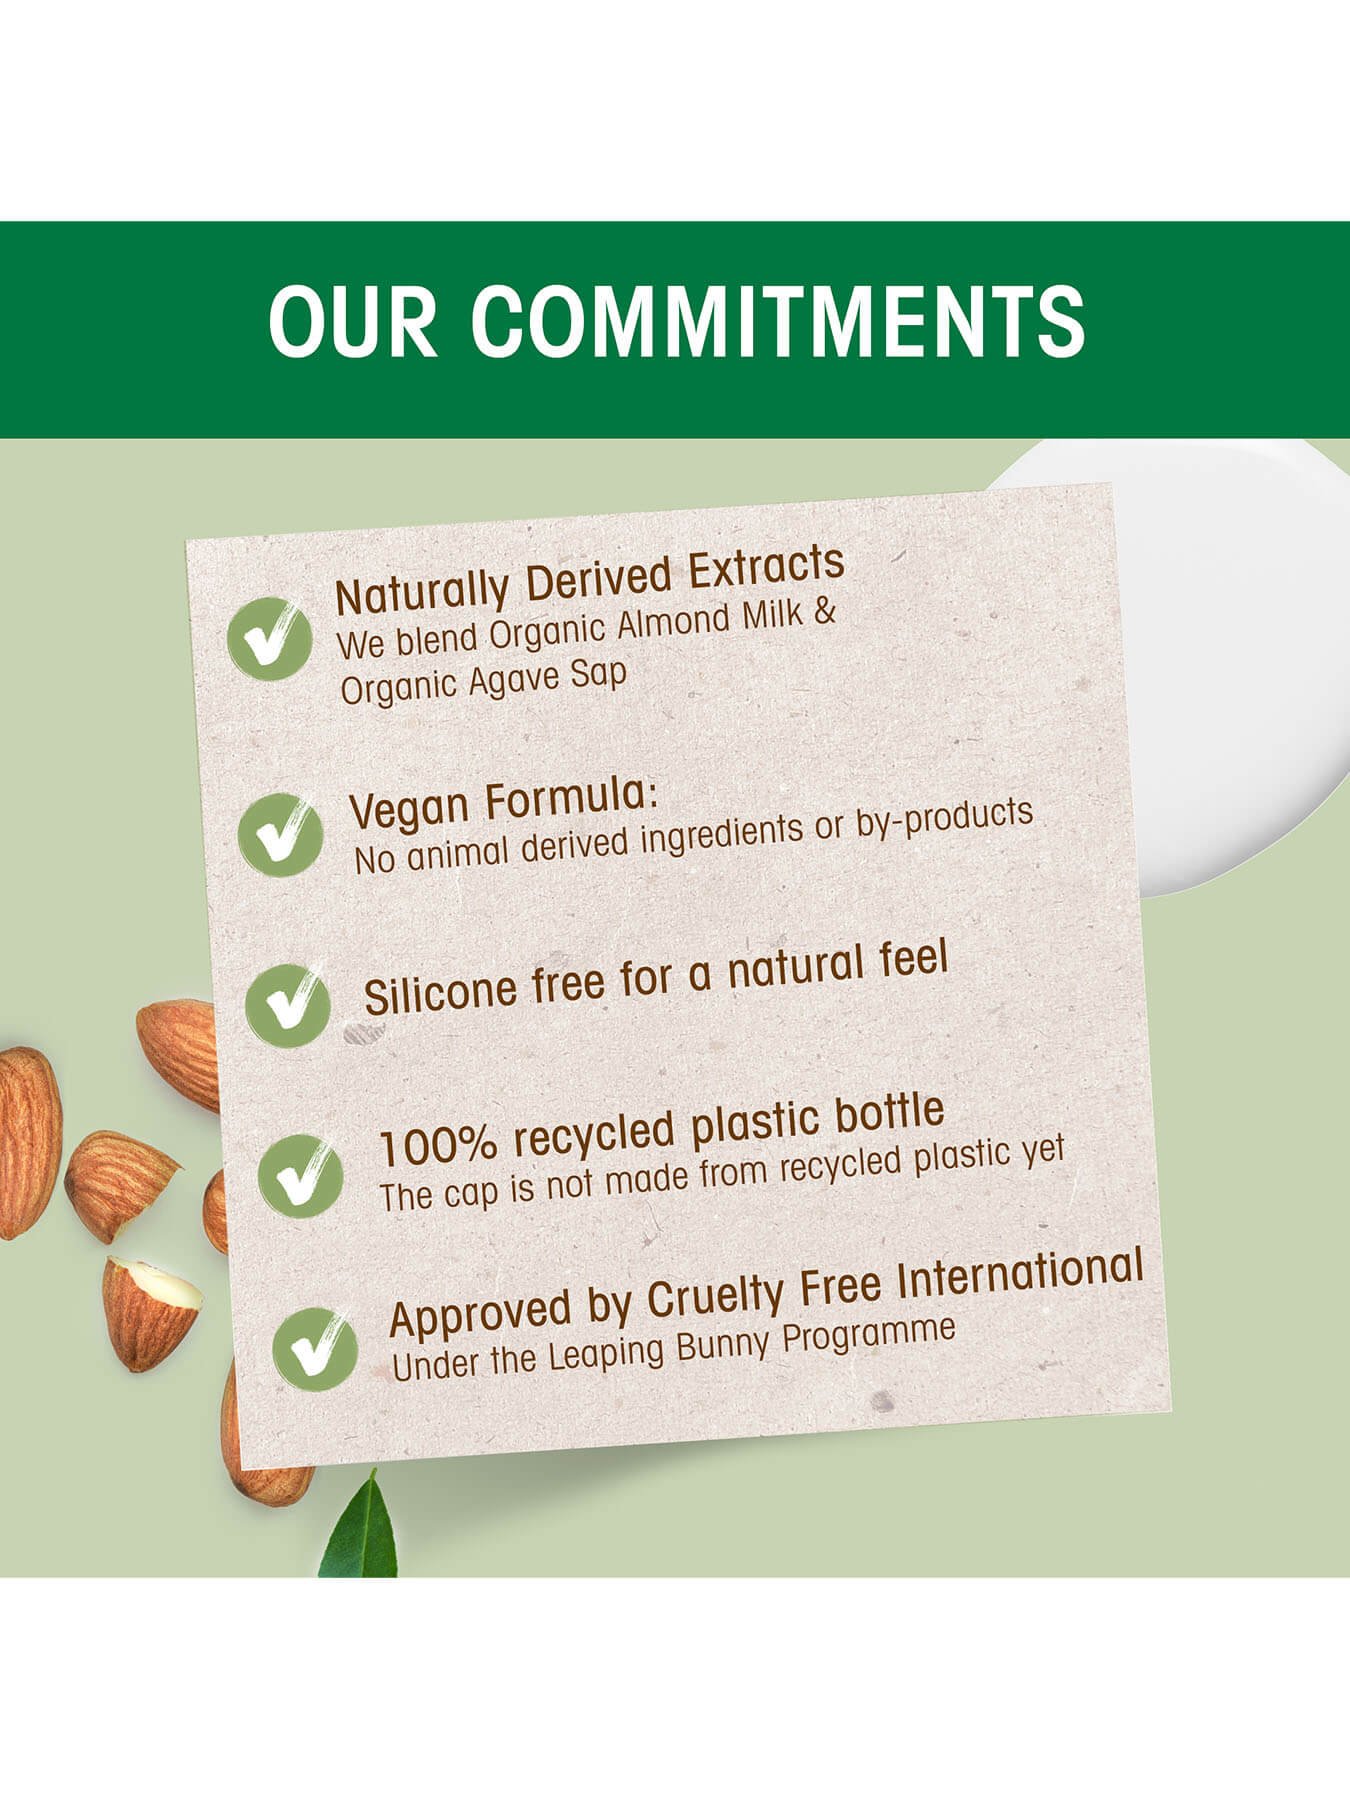 Ultimate Blends Almond Crush commitments